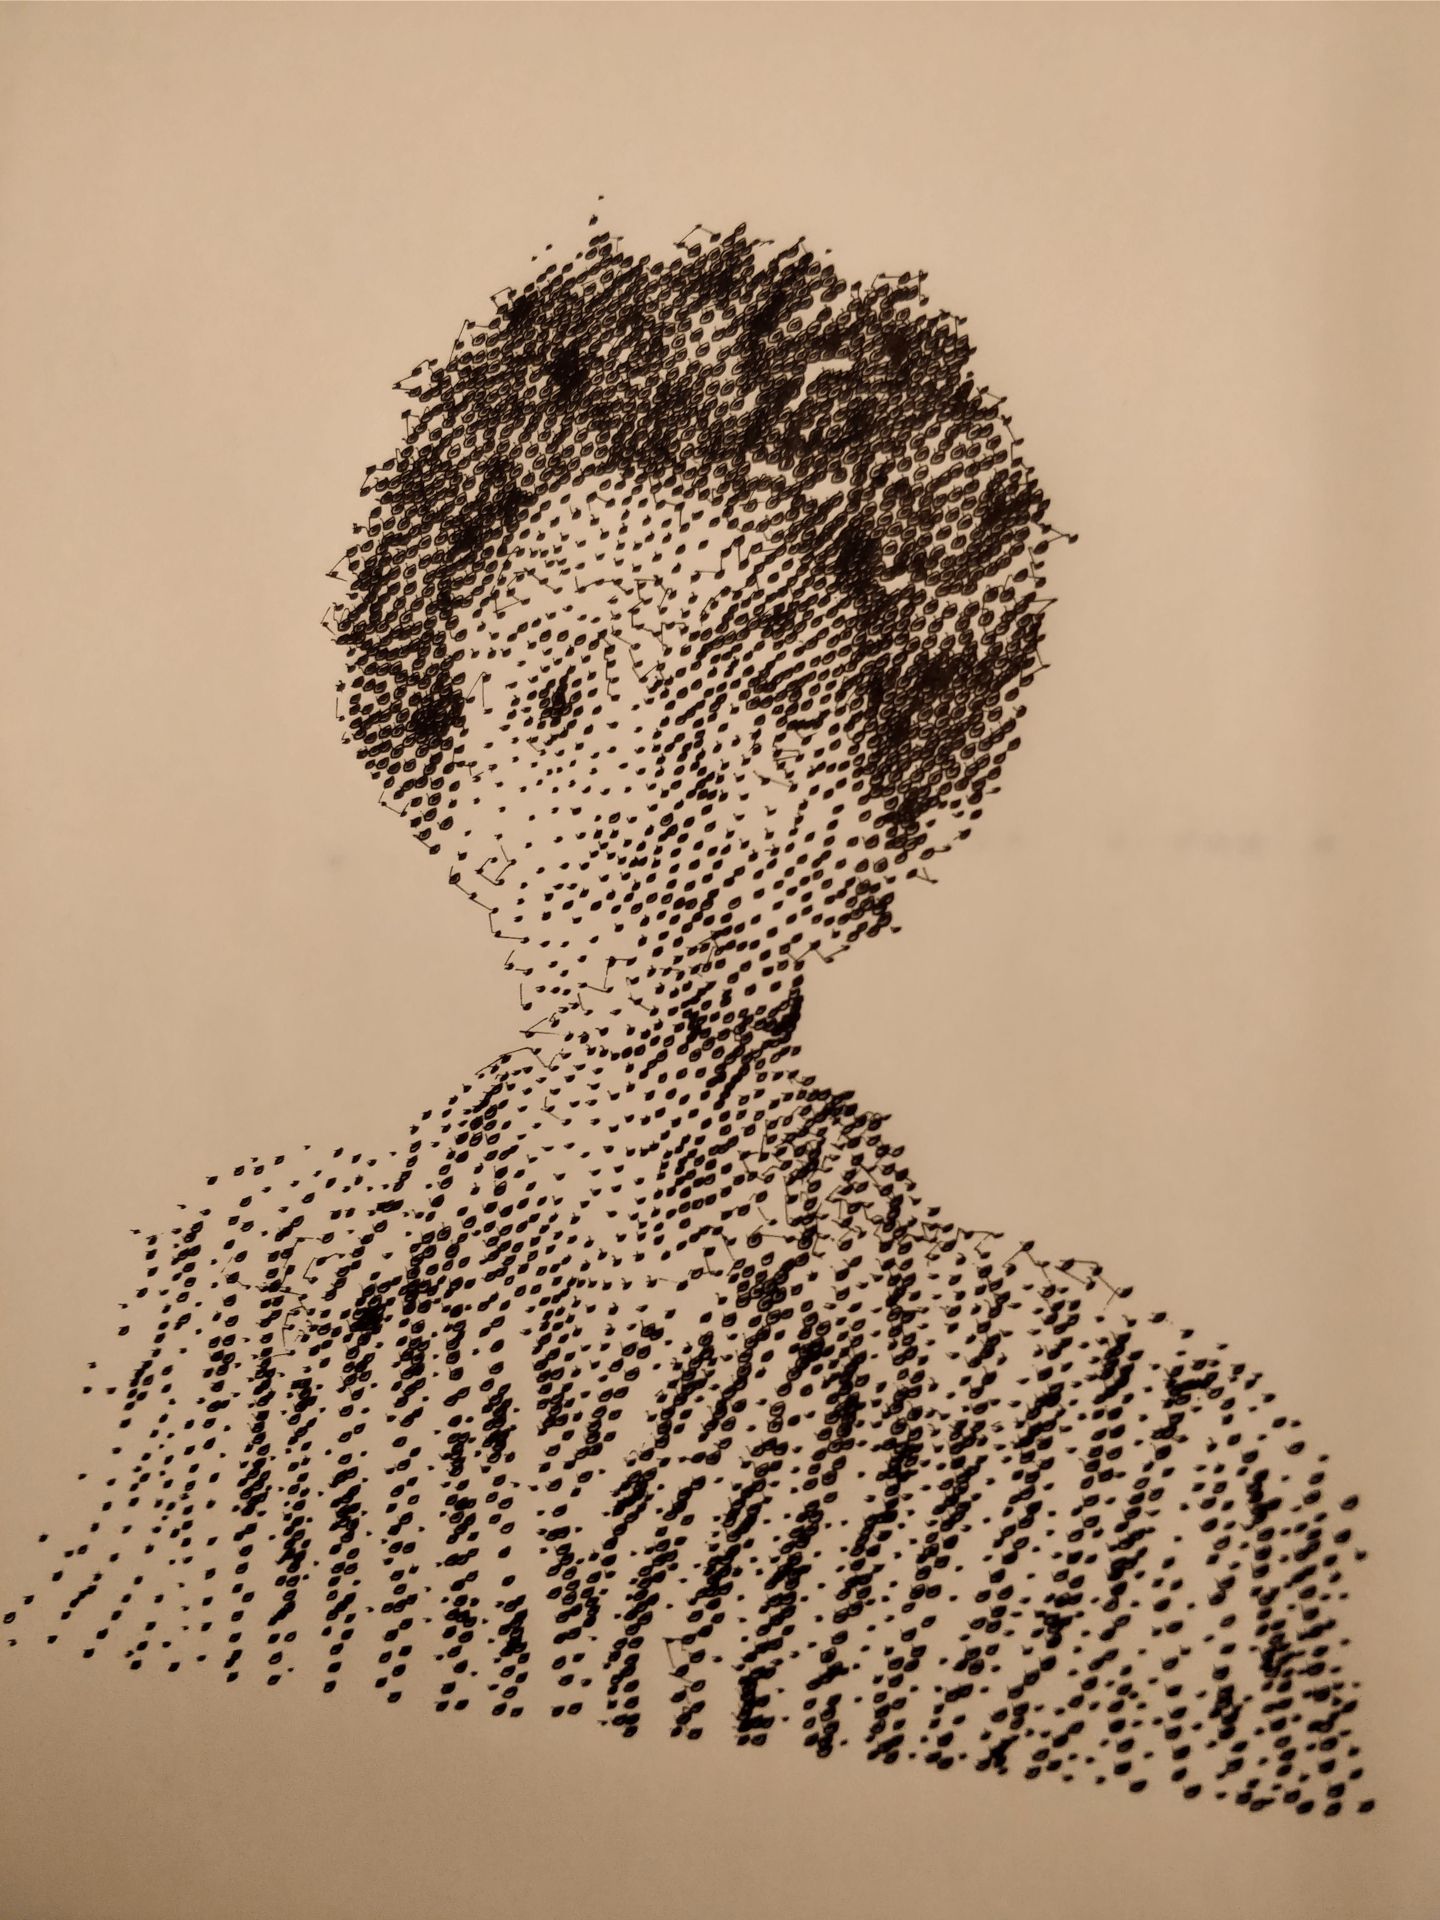 An image of a person in a stripped shirt using a stippled art style.